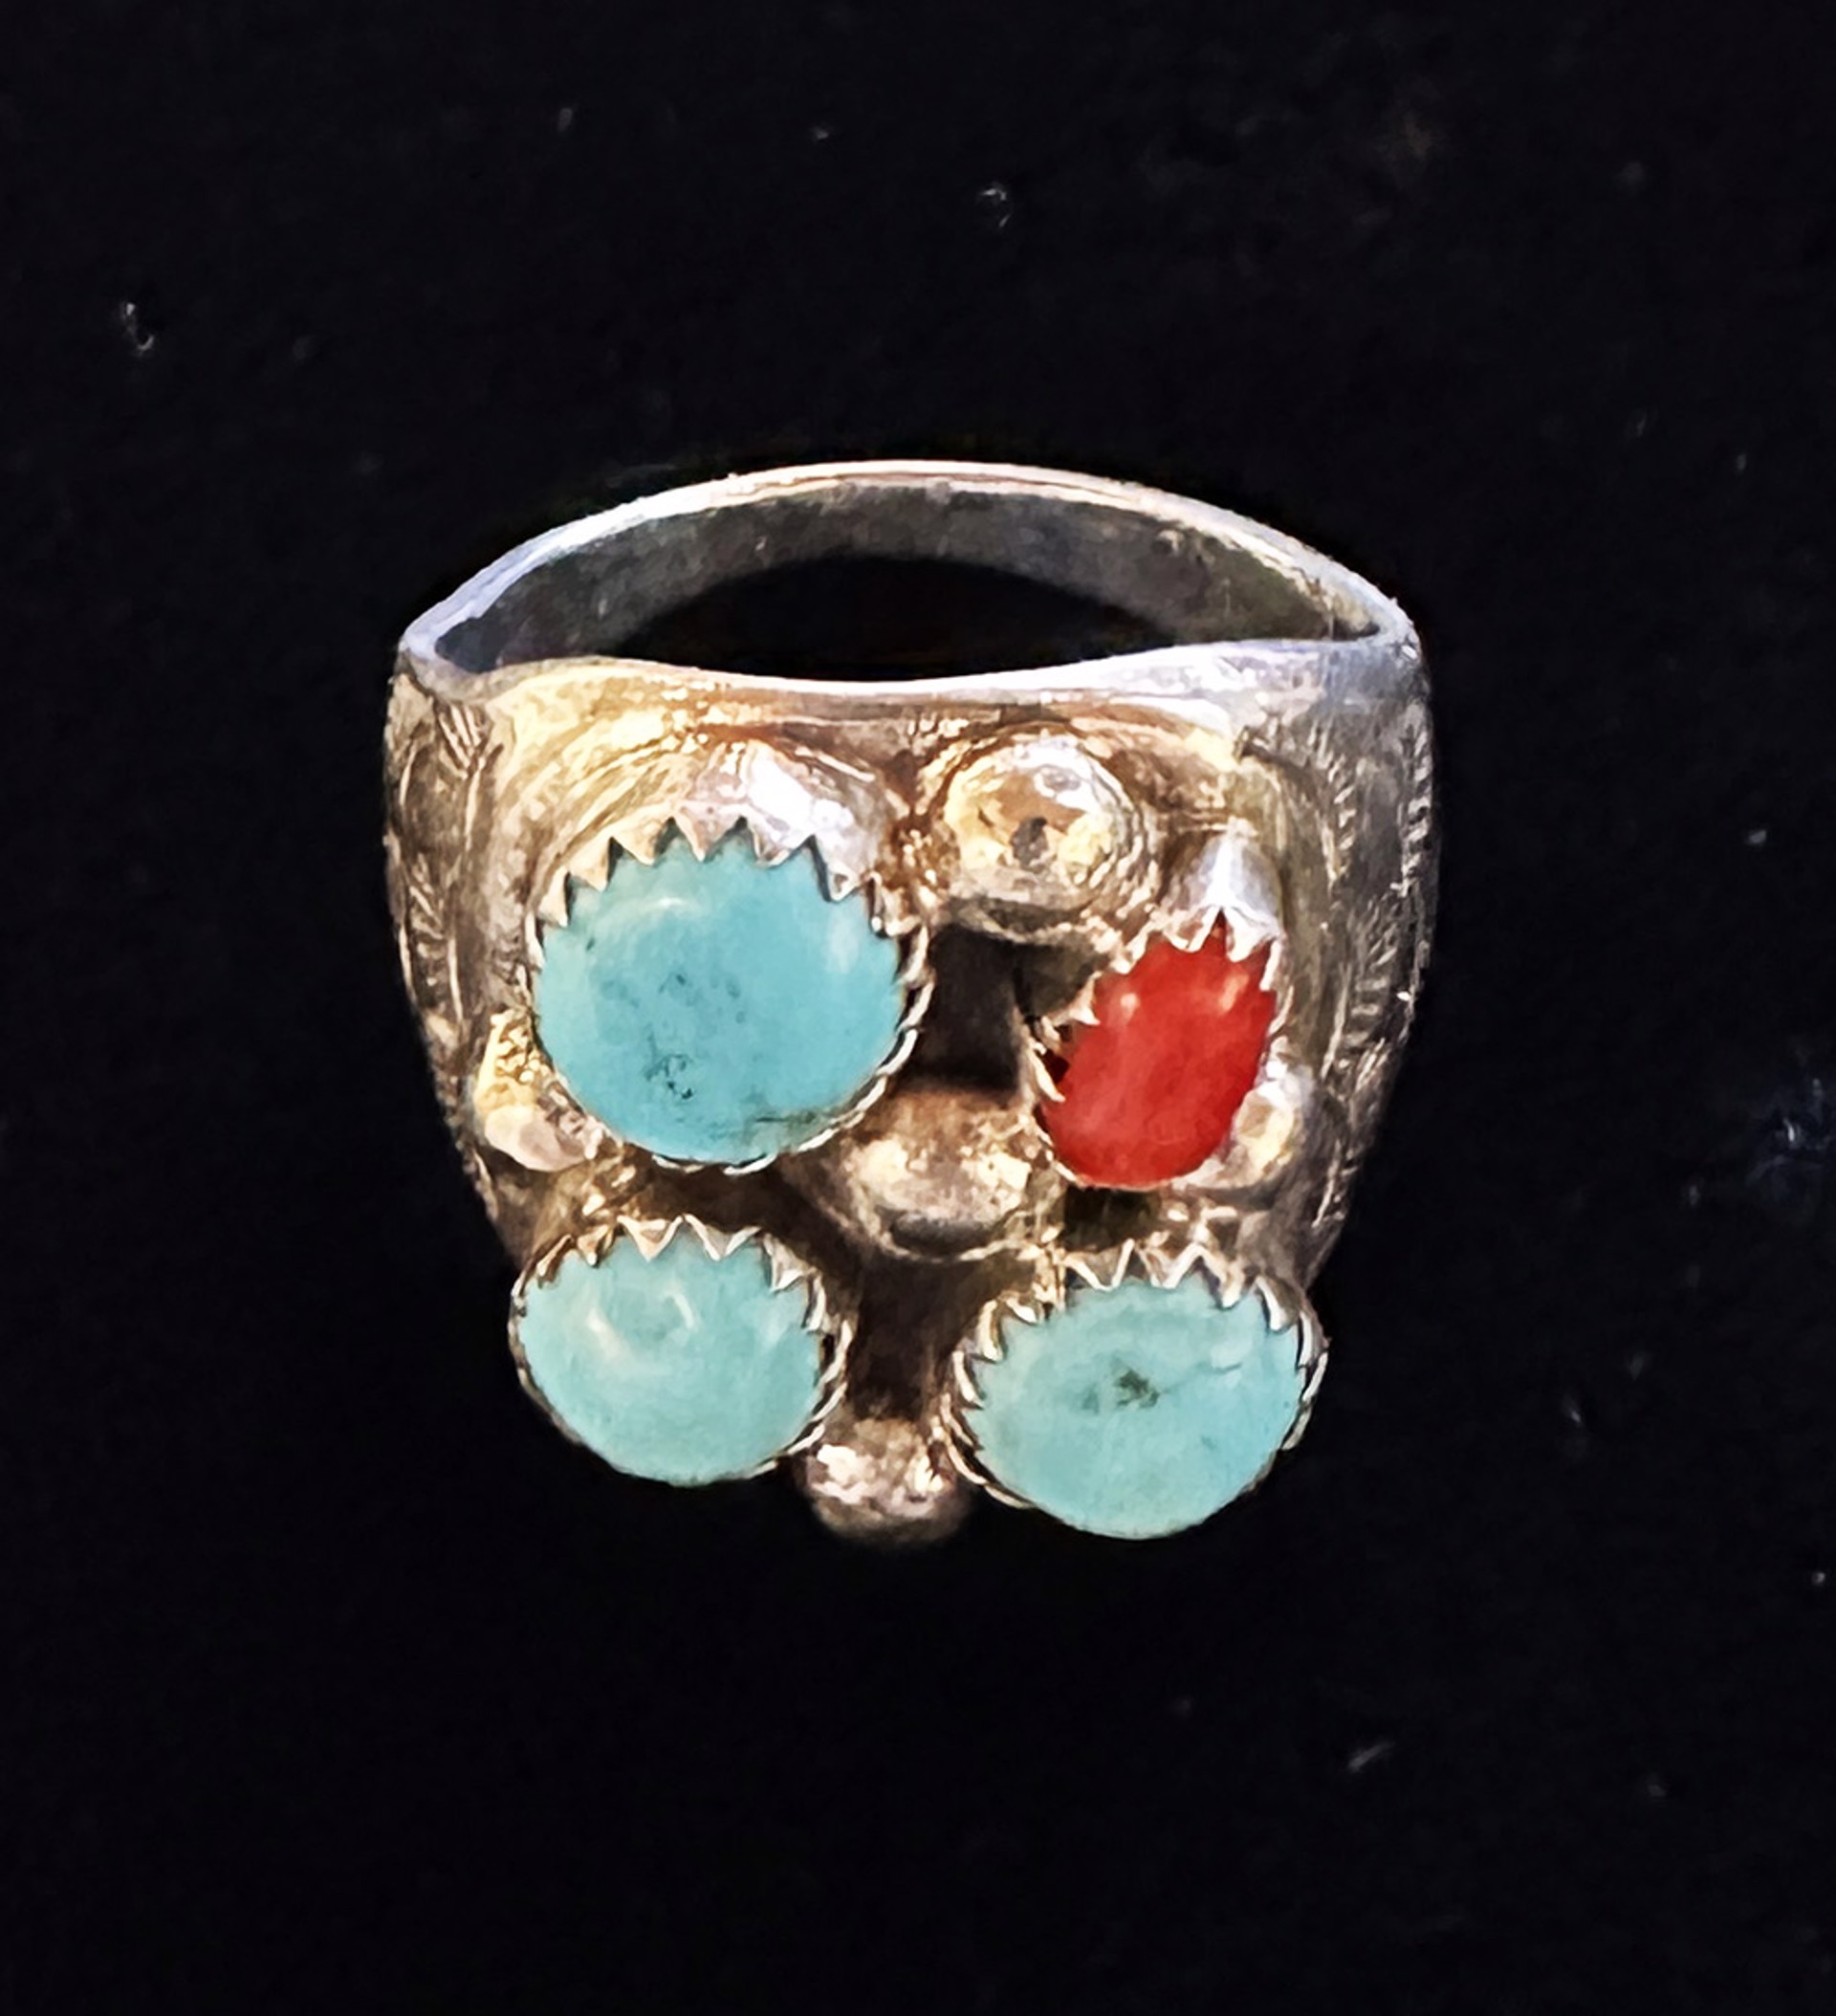 Silver, with 1 Coral, and 3 Turquoise stones